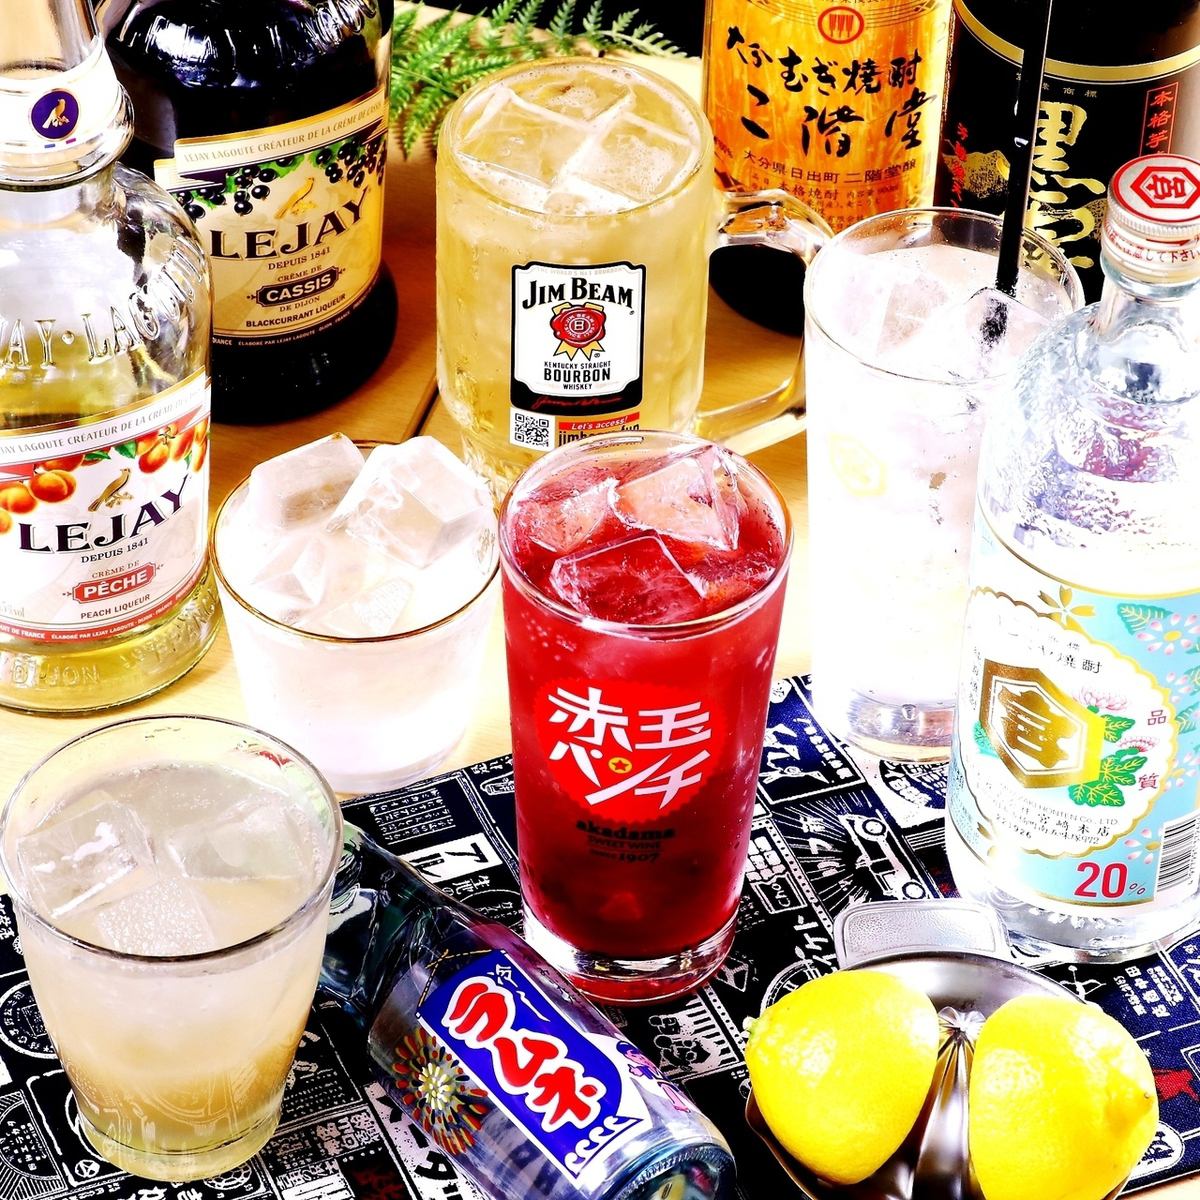 There is a wide variety of all-you-can-drink options including sours made with Kinmiya shochu and beer★